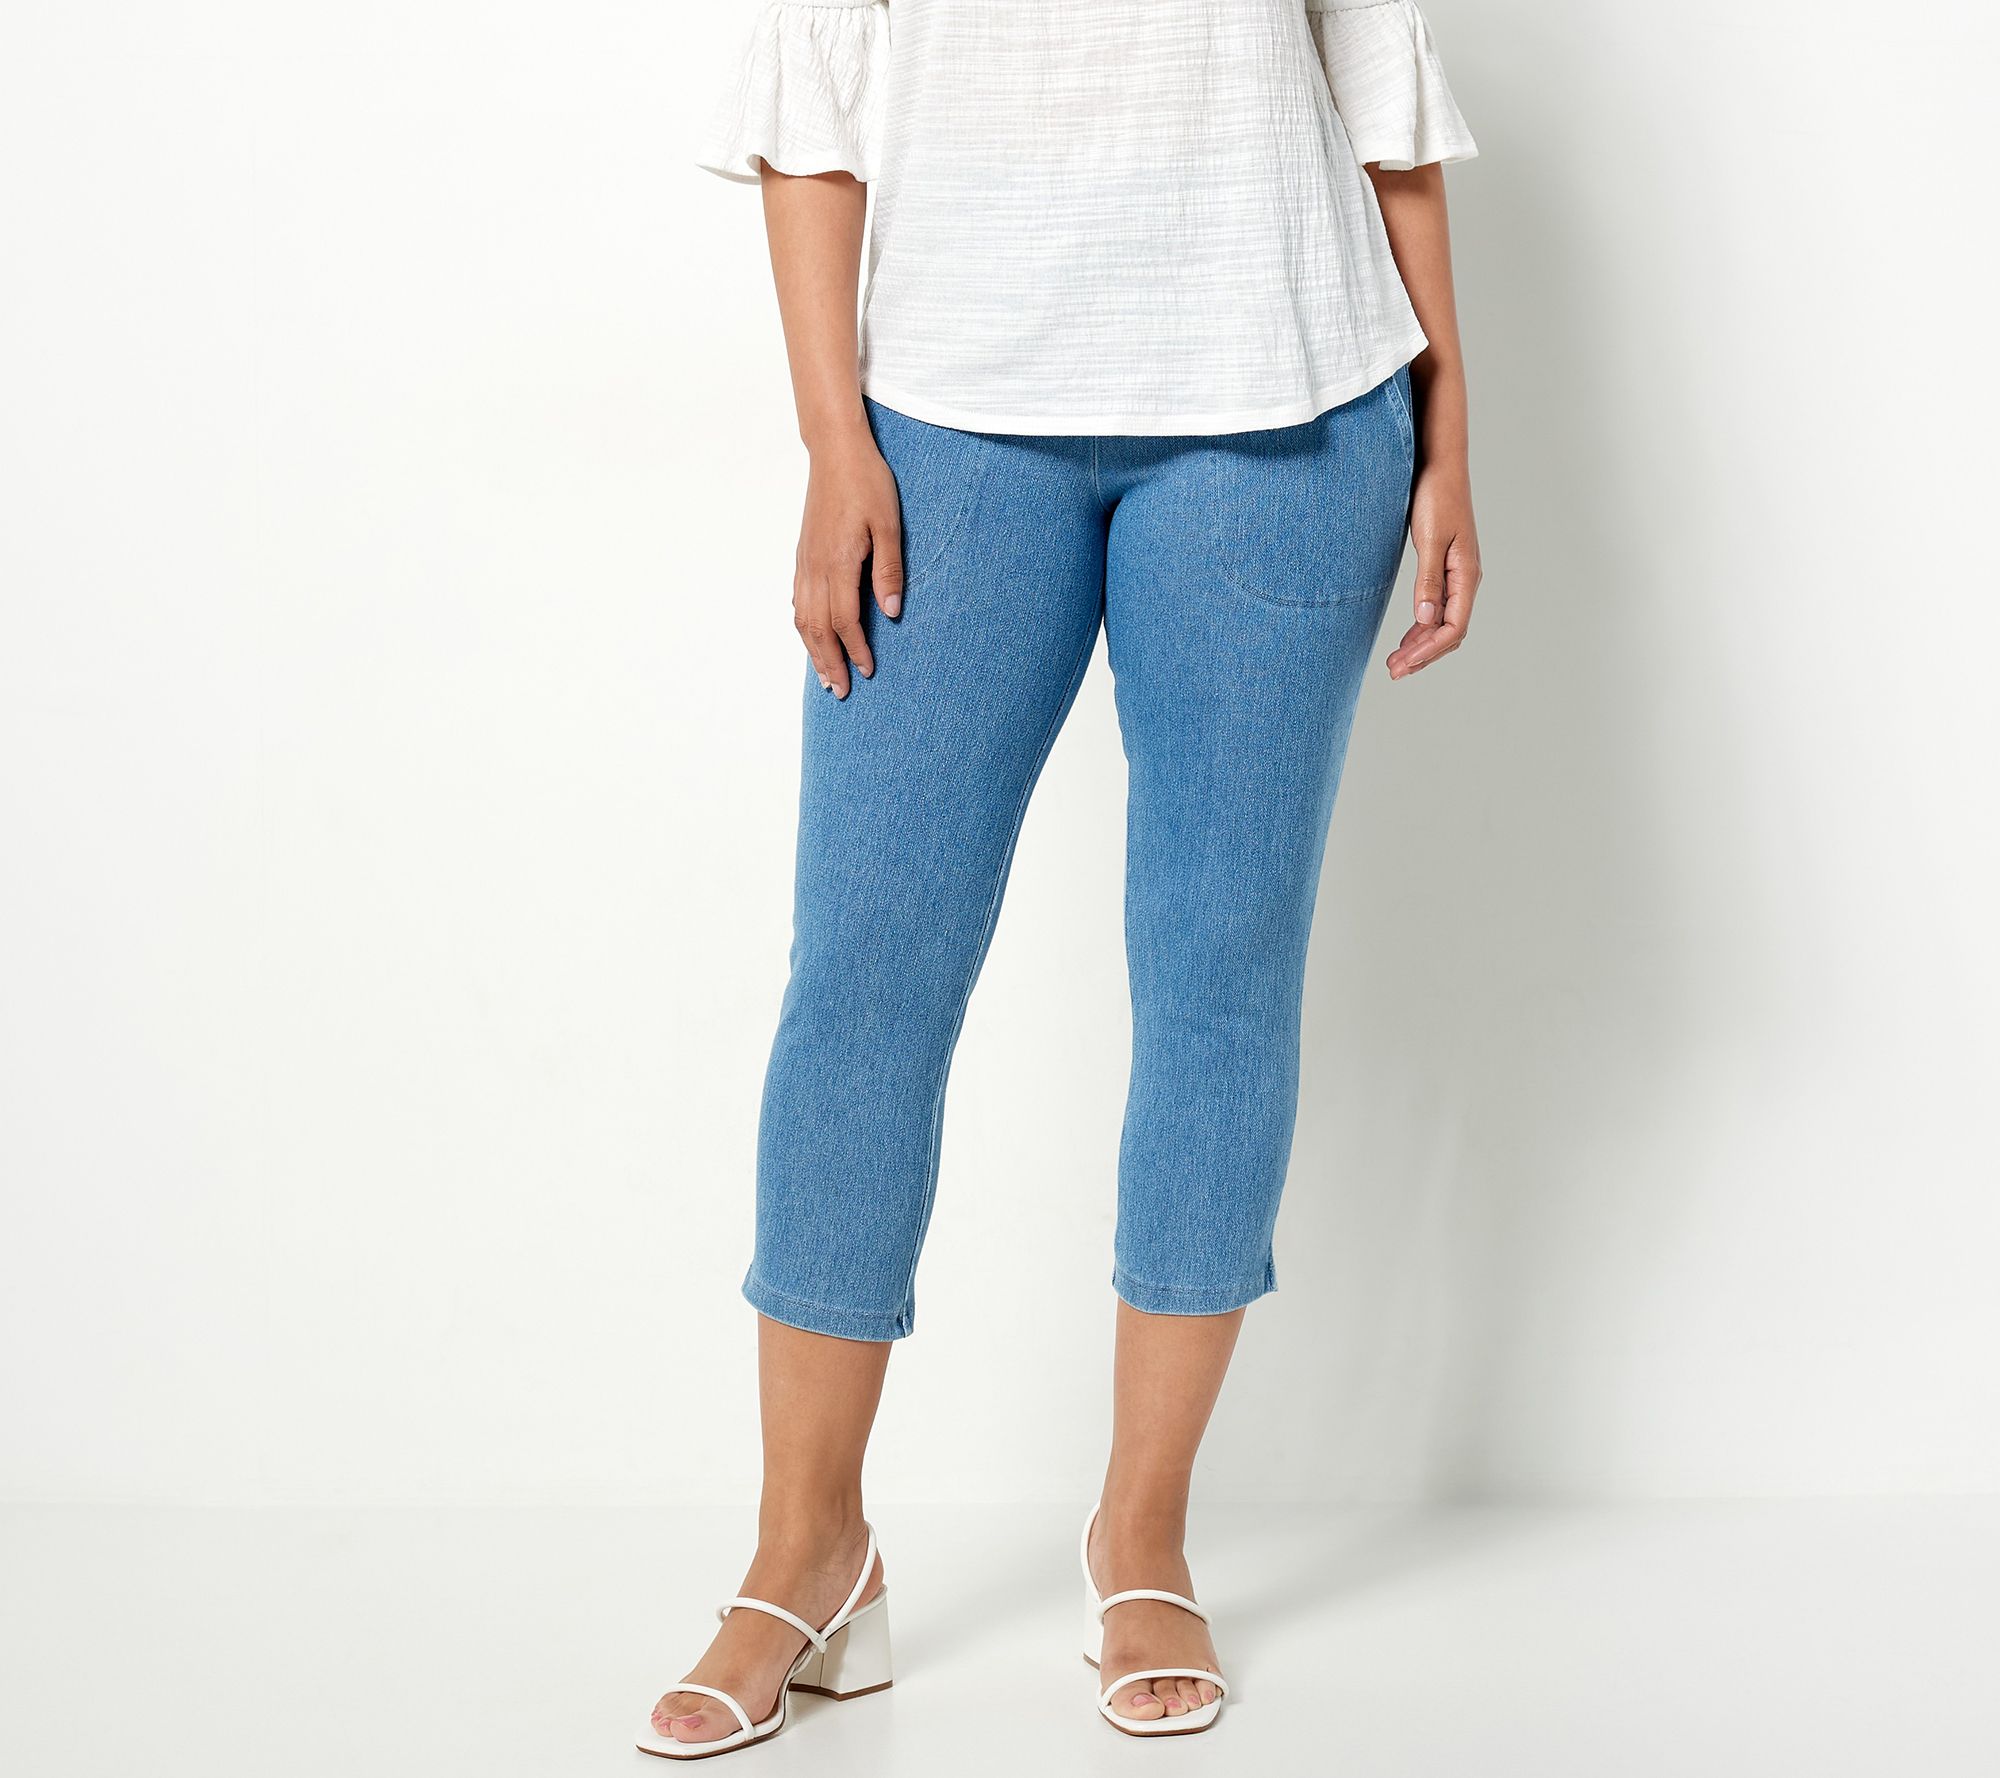 Women with Control Tall Prime Stretch Denim Pants 